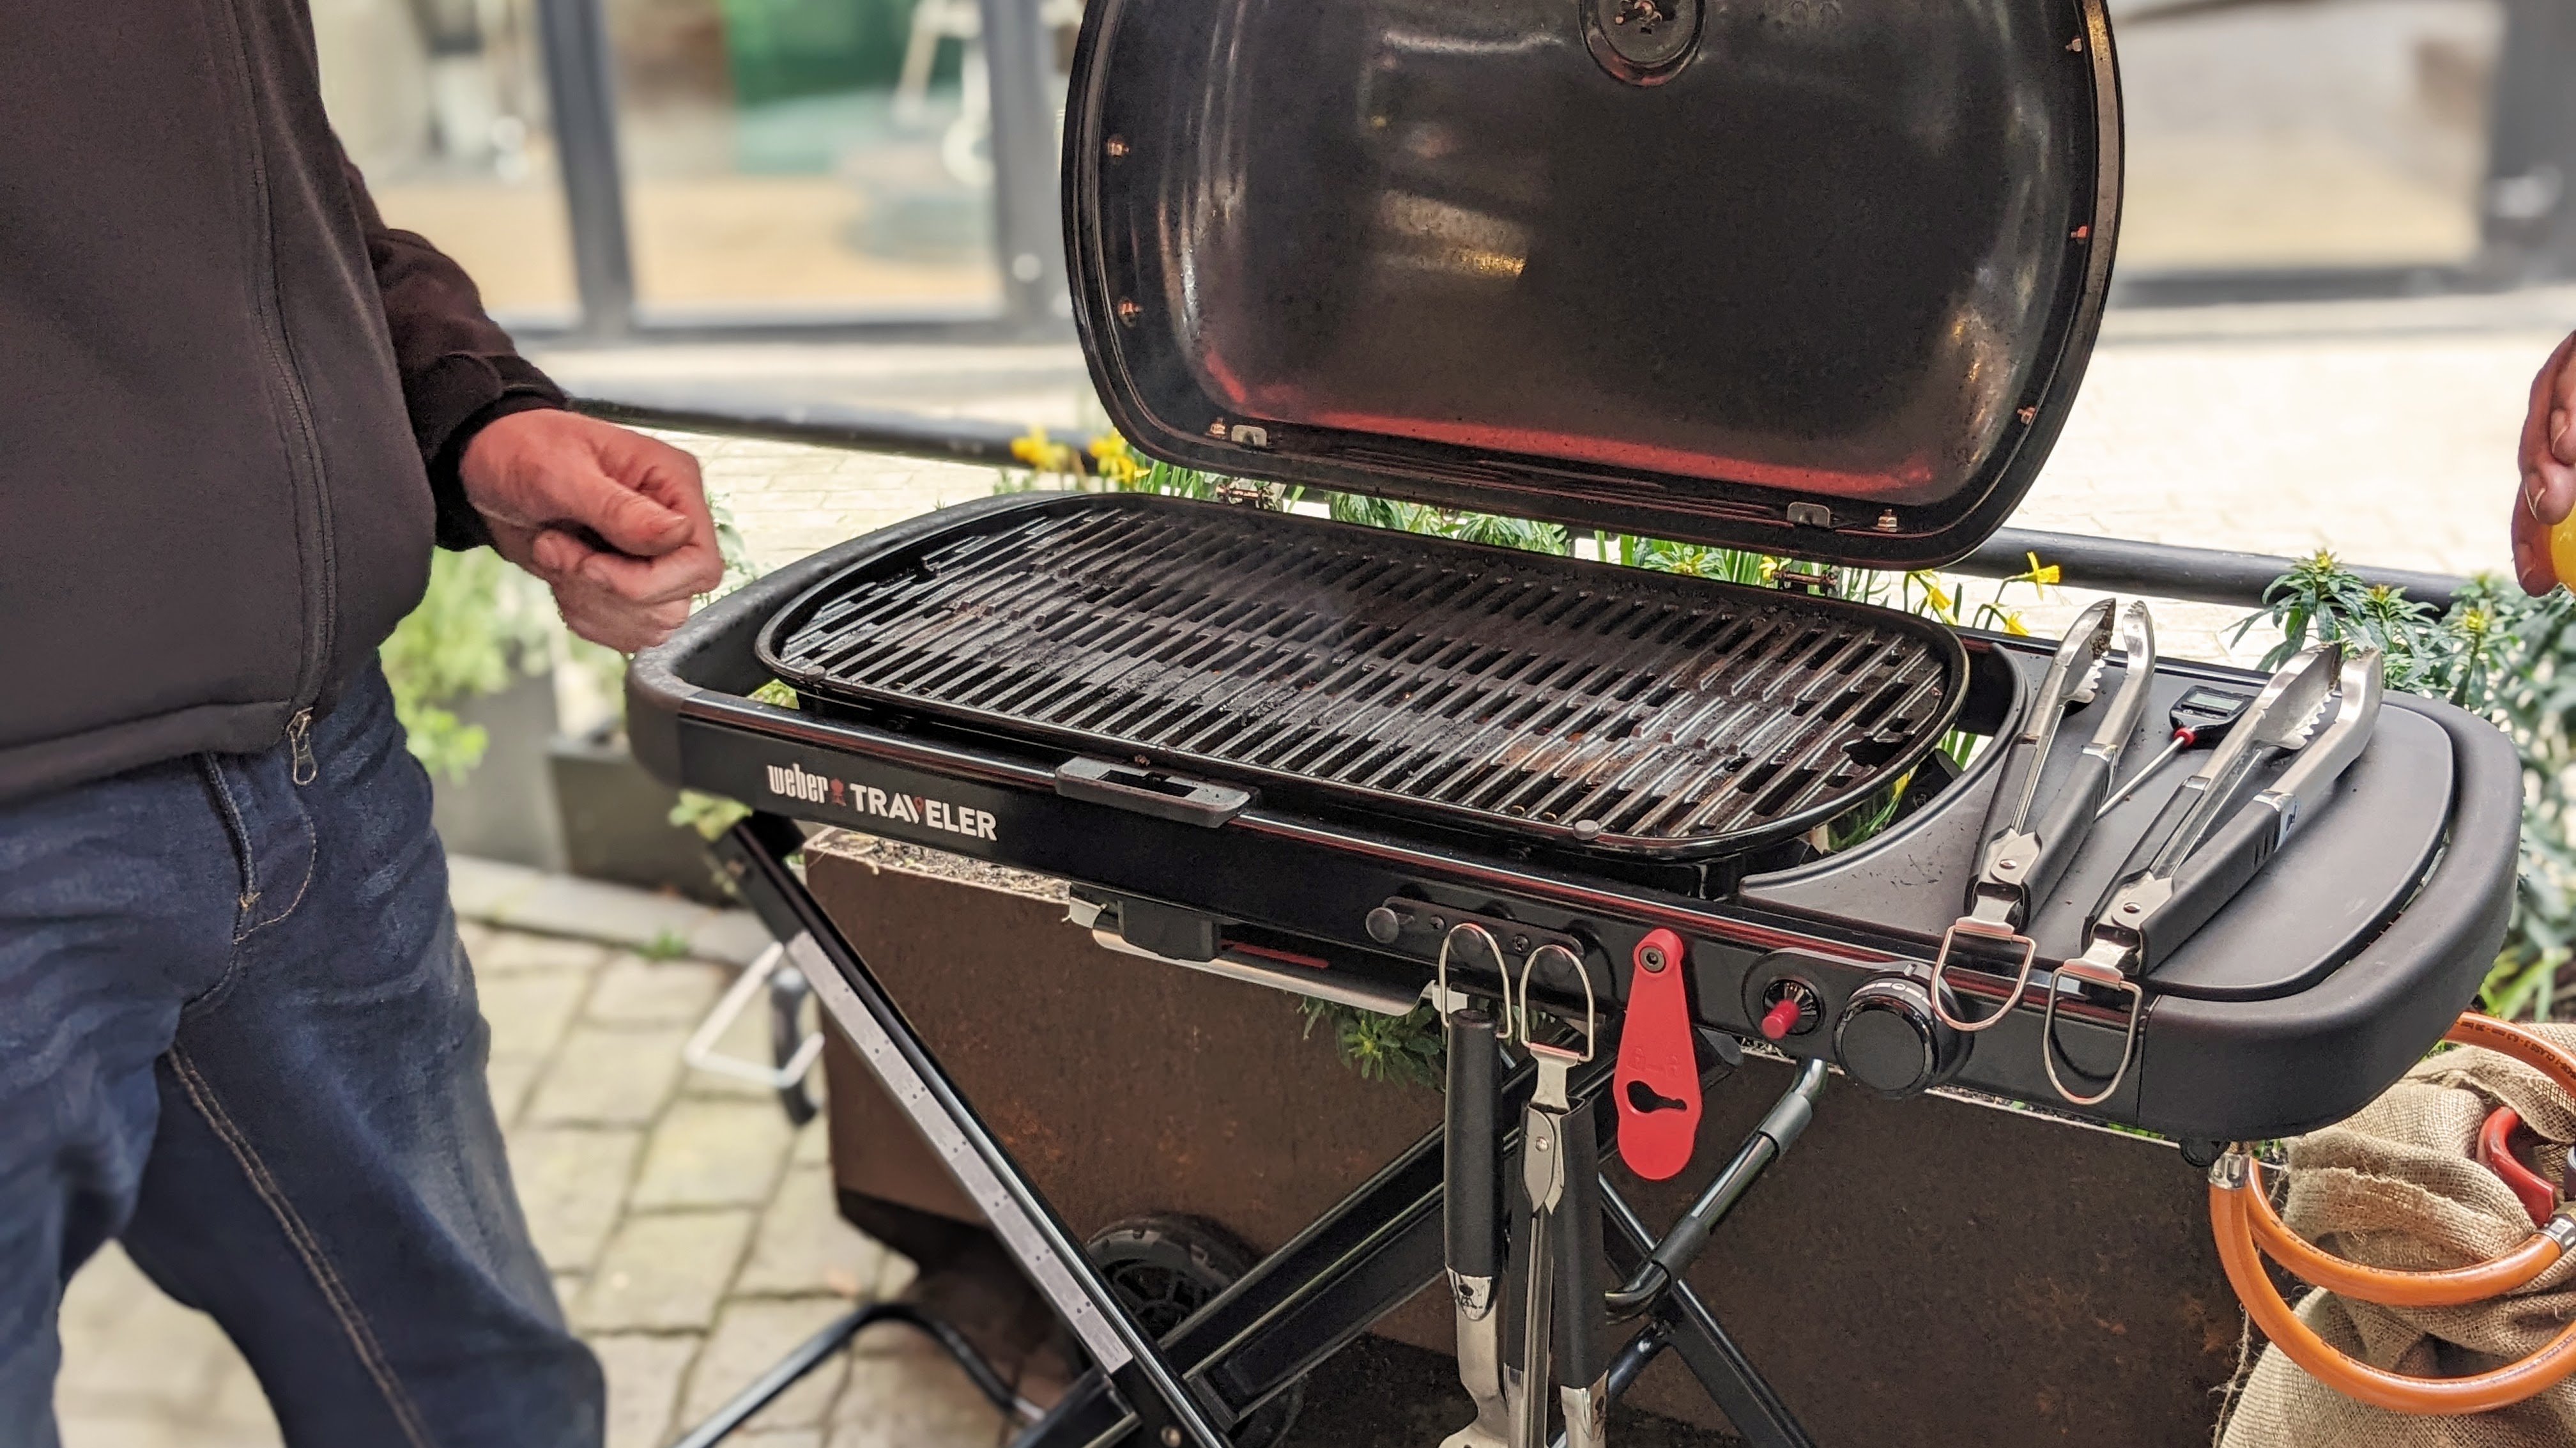 We've had a first look at the new Weber Traveler Compact grill — here's why it's even better for on-the-go cooking